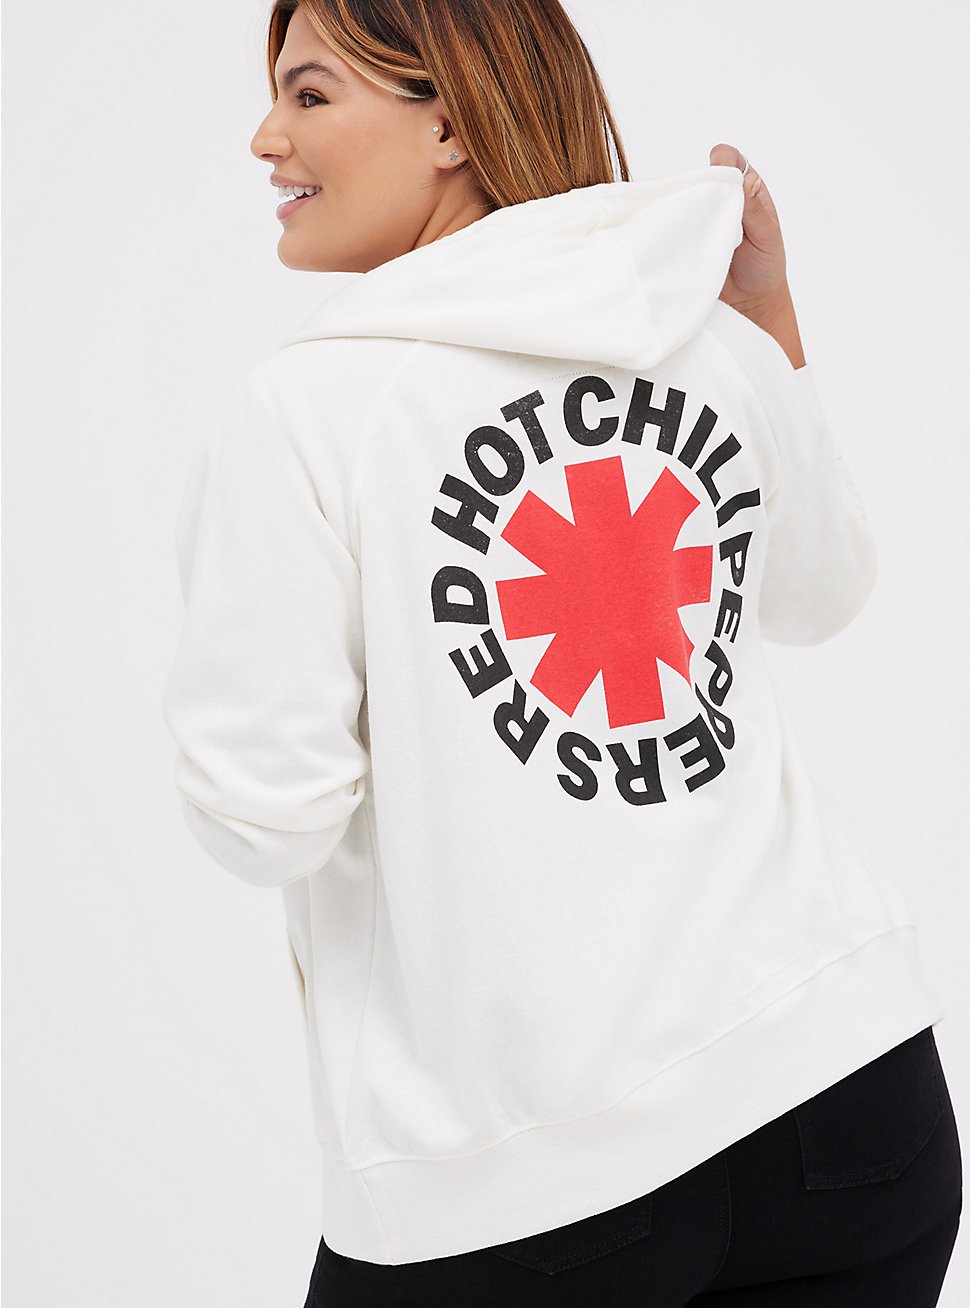 Zip Hoodie - Cozy Fleece Red Hot Chili Peppers Logo Graphic White, IVORY, hi-res